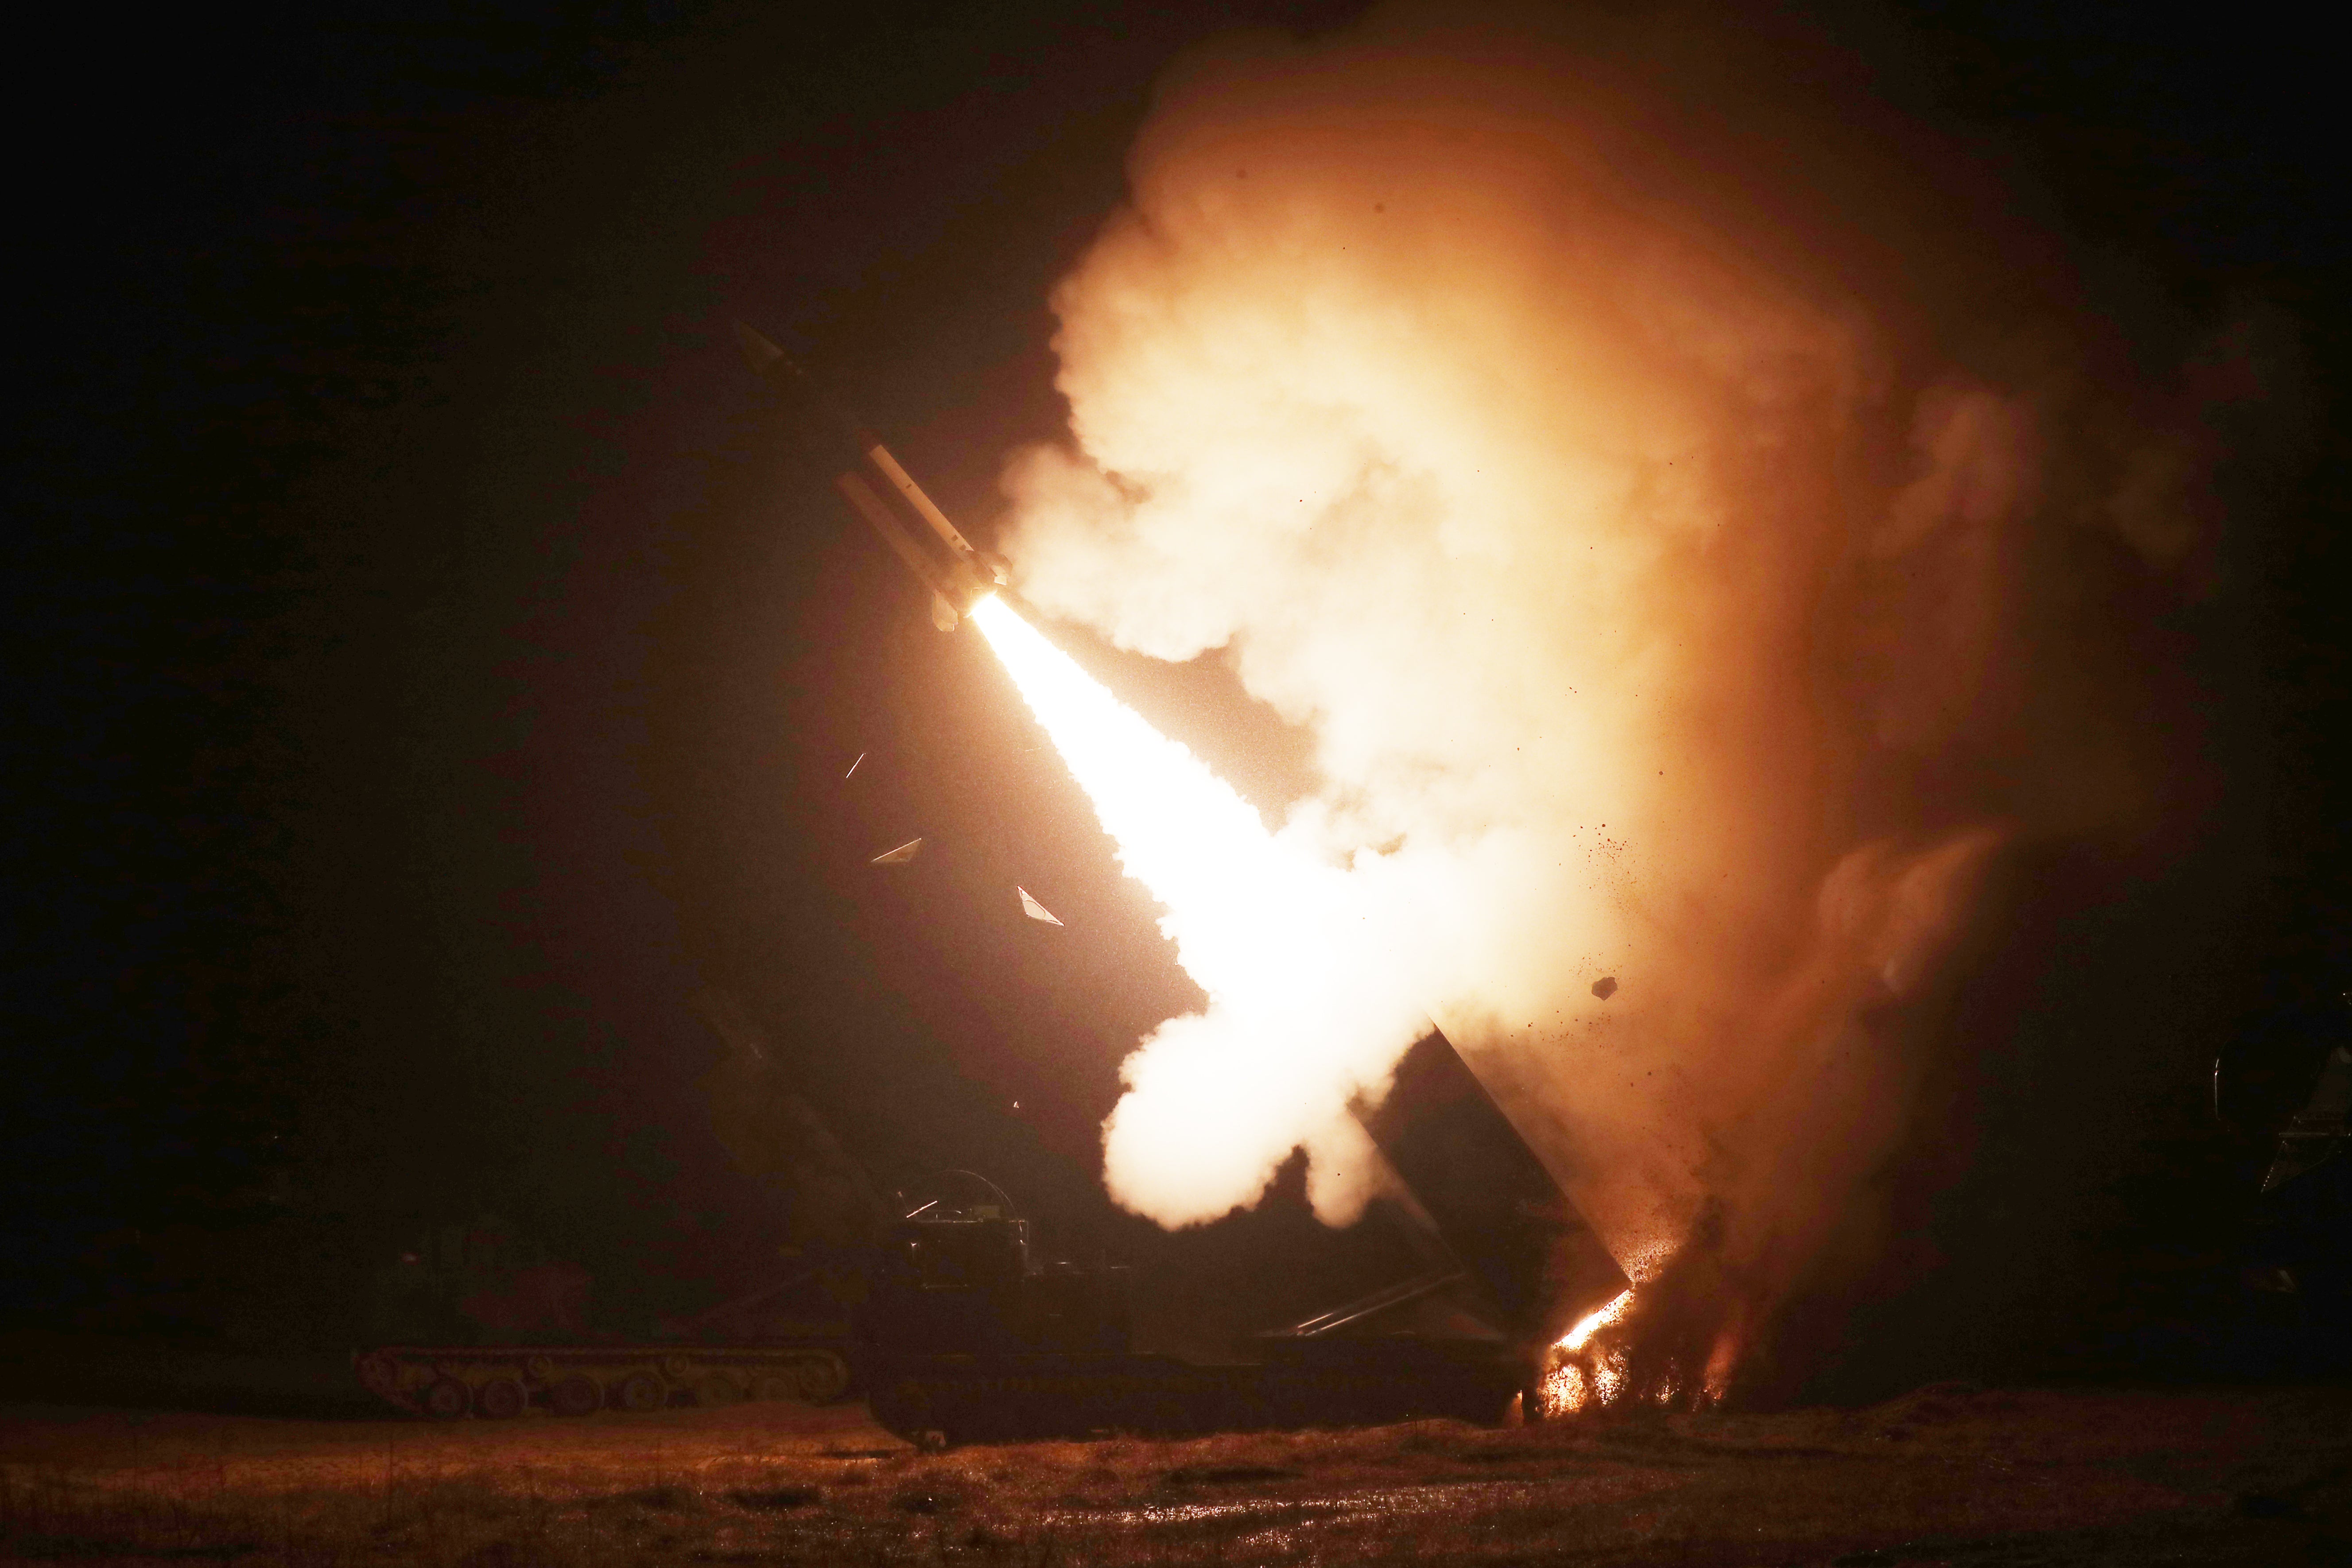 In this handout image released by the South Korean Defence Ministry, an  Army Tactical Missile System (ATACMS) is fired during a joint training  between the United States and South Korea, on October 05, 2022 at an  undisclosed location. The South Korean and U.S. militaries fired a  volley of missiles into the sea in response to North Korea firing a  ballistic missile over Japan. (Photo: South Korean Defence Ministry, Getty Images)